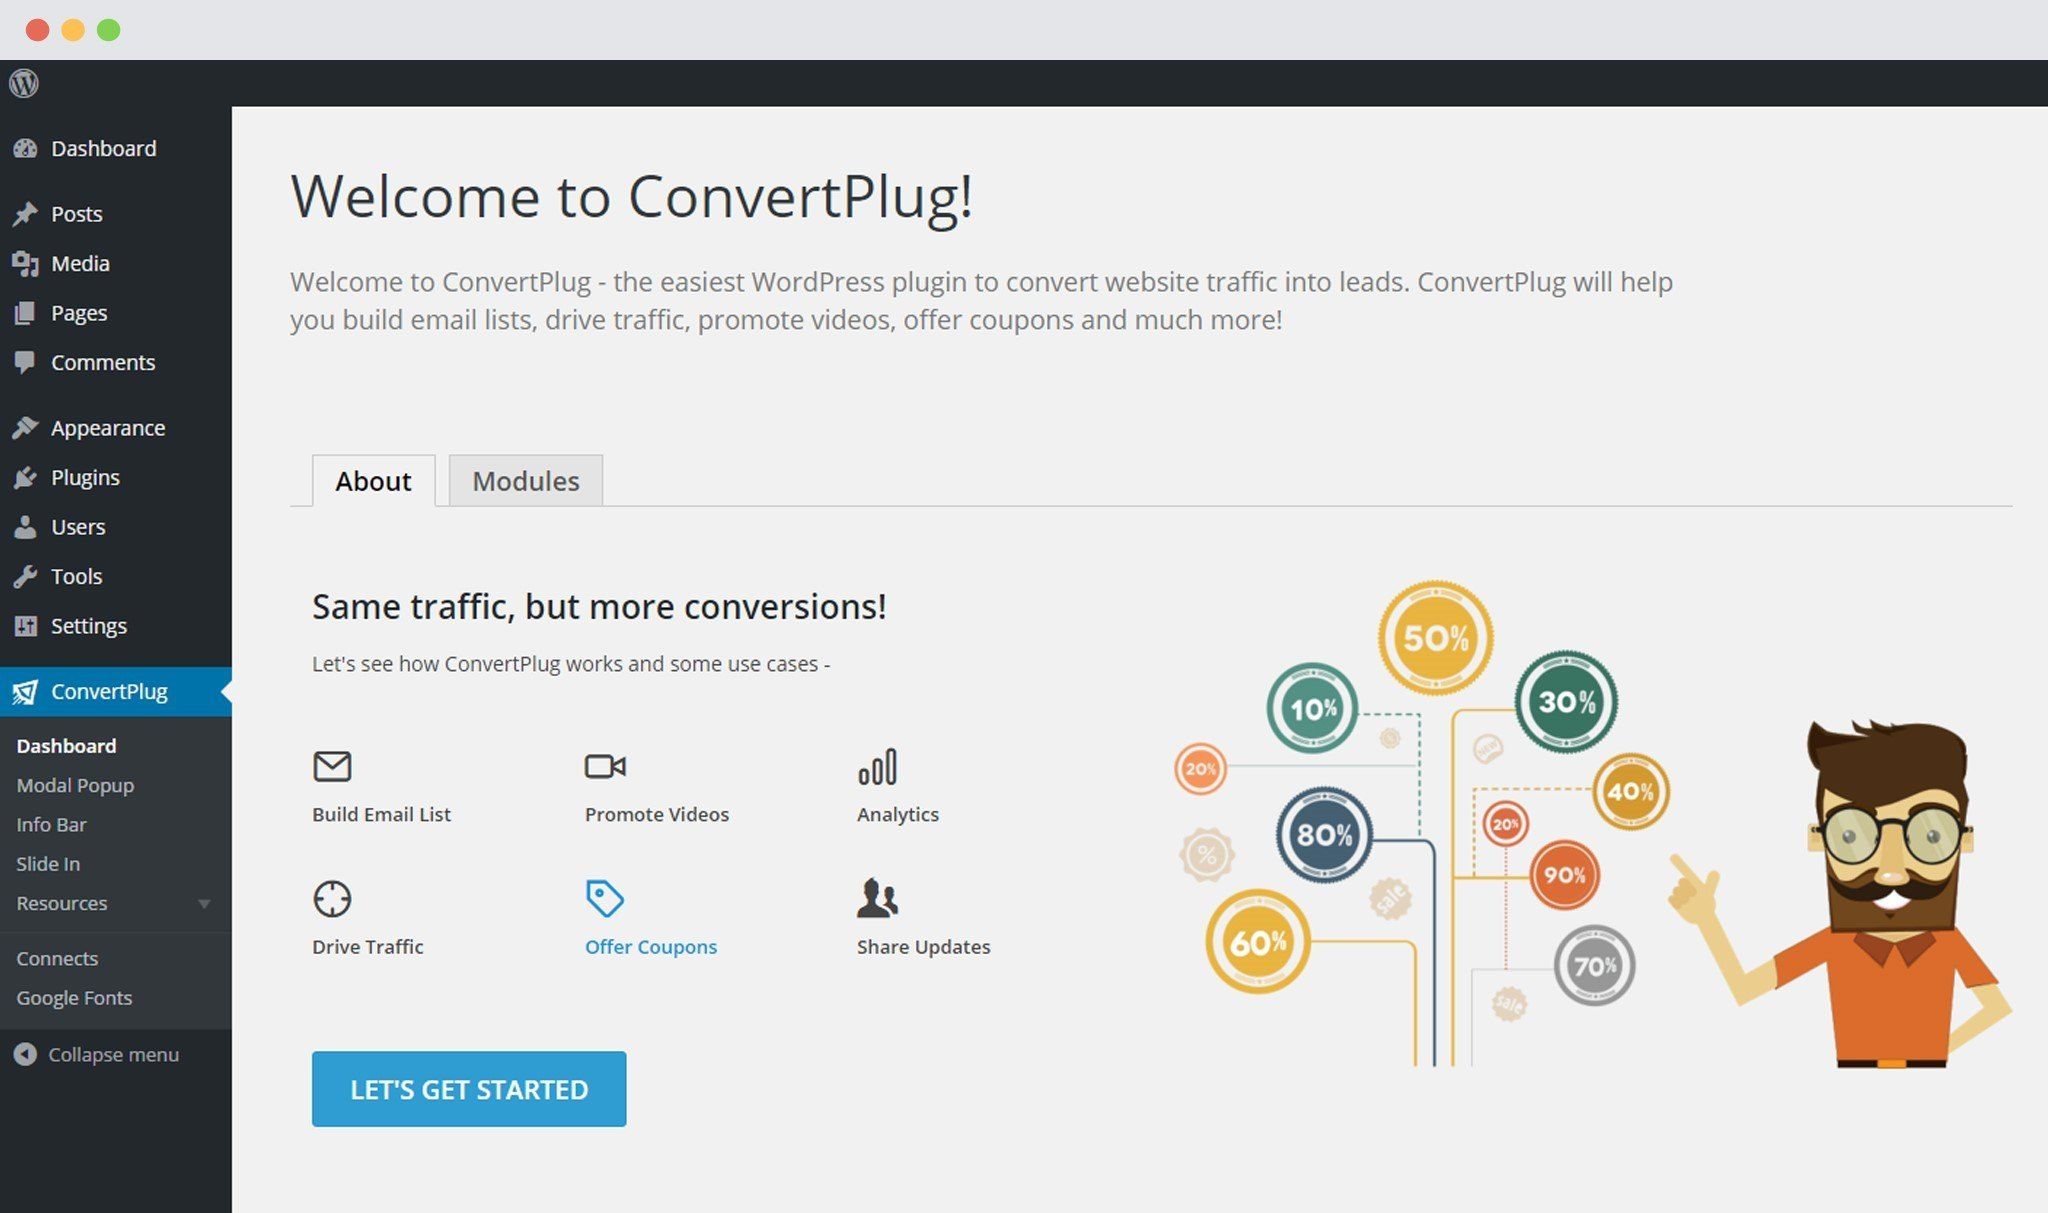 modal-popup-page in ConvertPlus